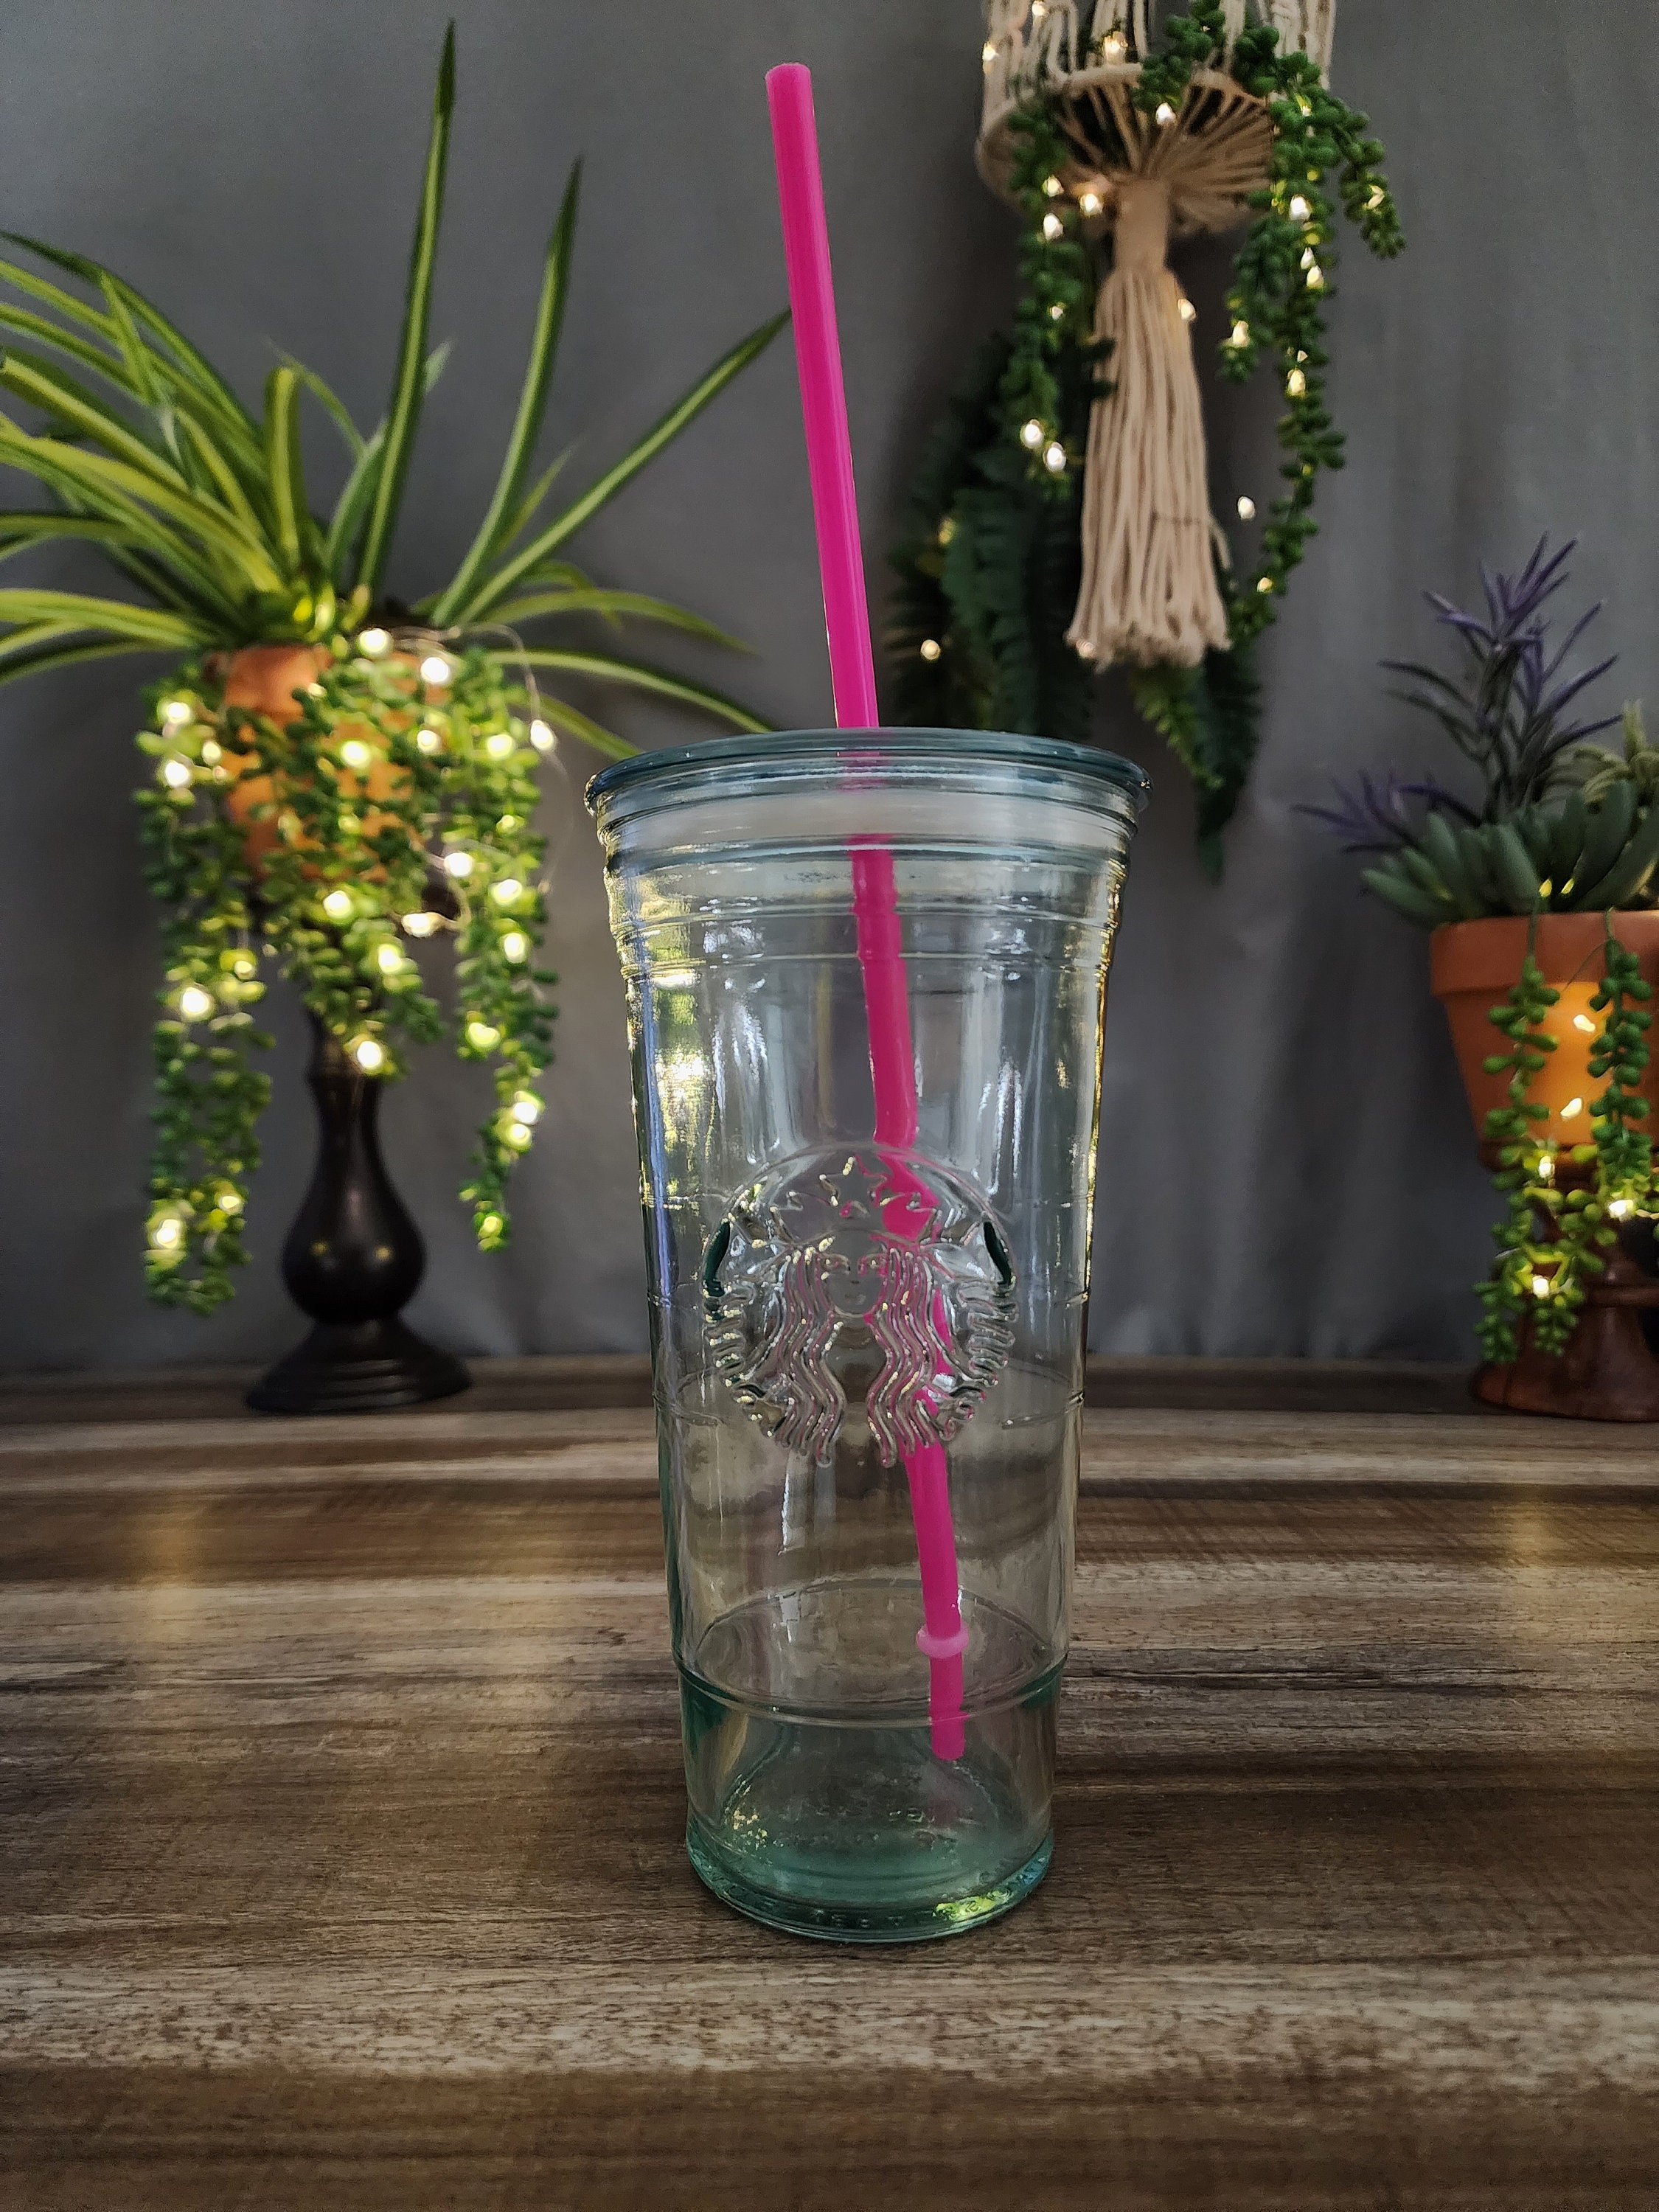 Starbucks' Recycled Glass Cup Divides Customers